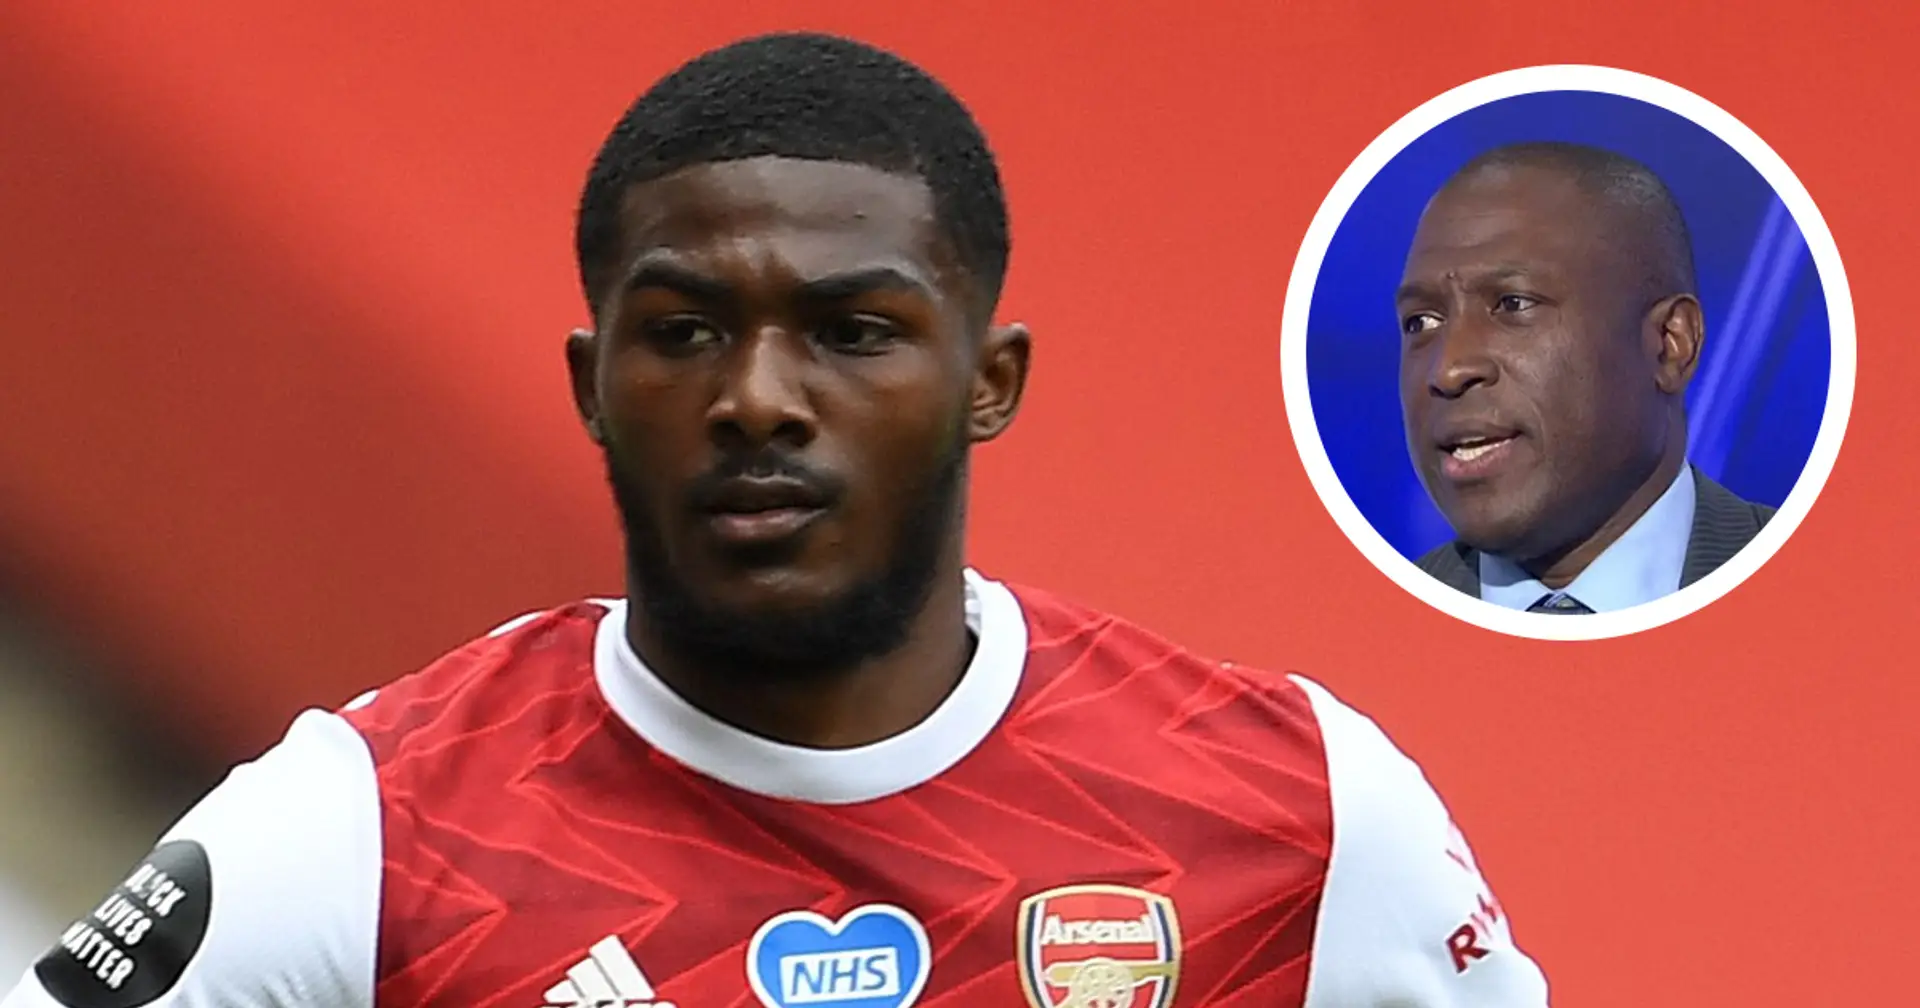 Kevin Campbell: 'What’s happened to Maitland-Niles? Why can’t he even get in the team?'